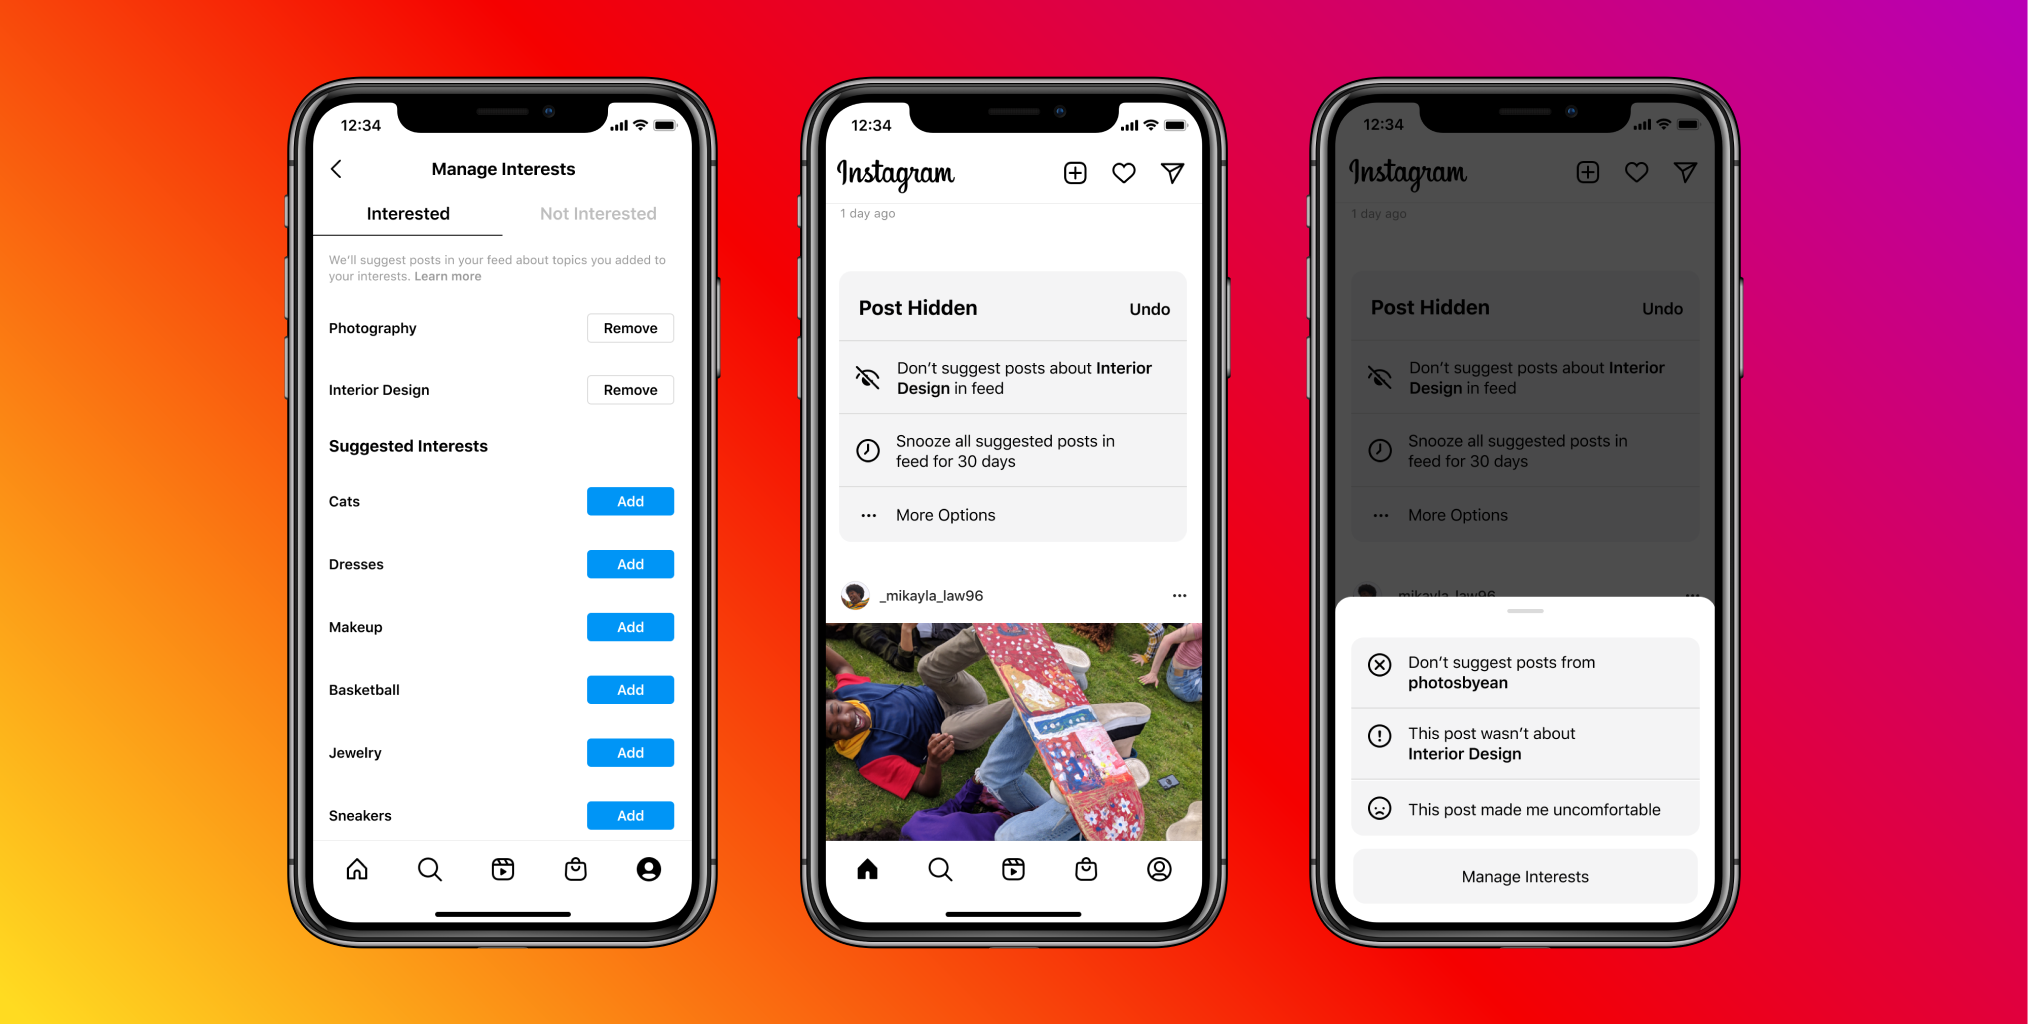 Instagram's newest test mixes 'Suggested Posts' into the feed to keep you scrolling | TechCrunch